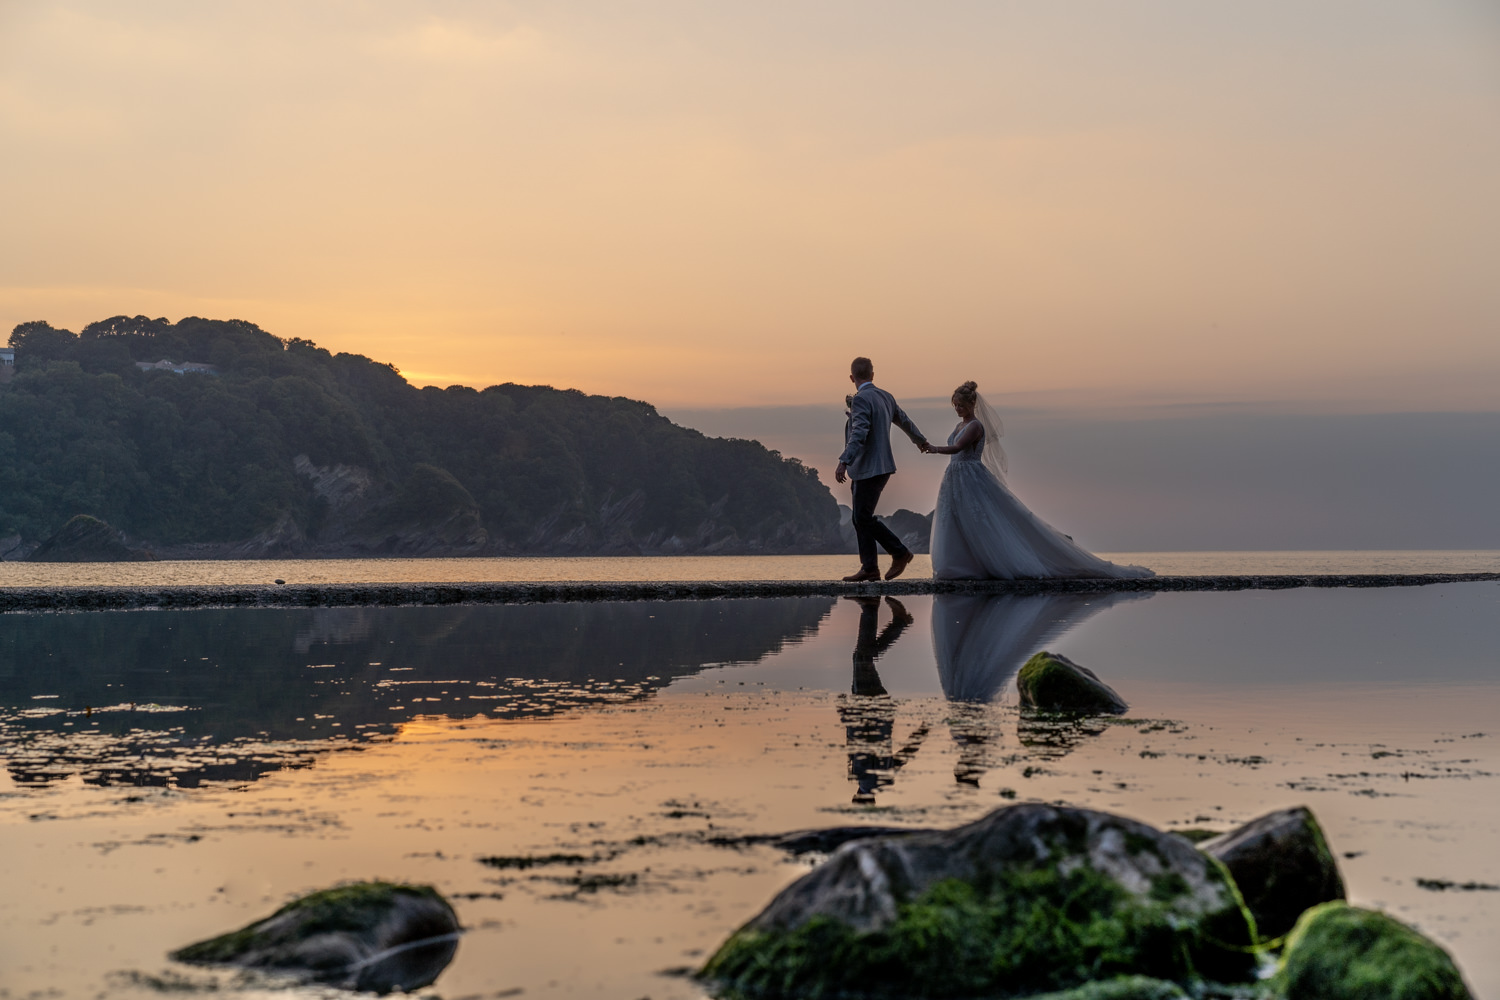 north devon coastal wedding at combe martin, bride and groom walking on coastal path with reflection in water